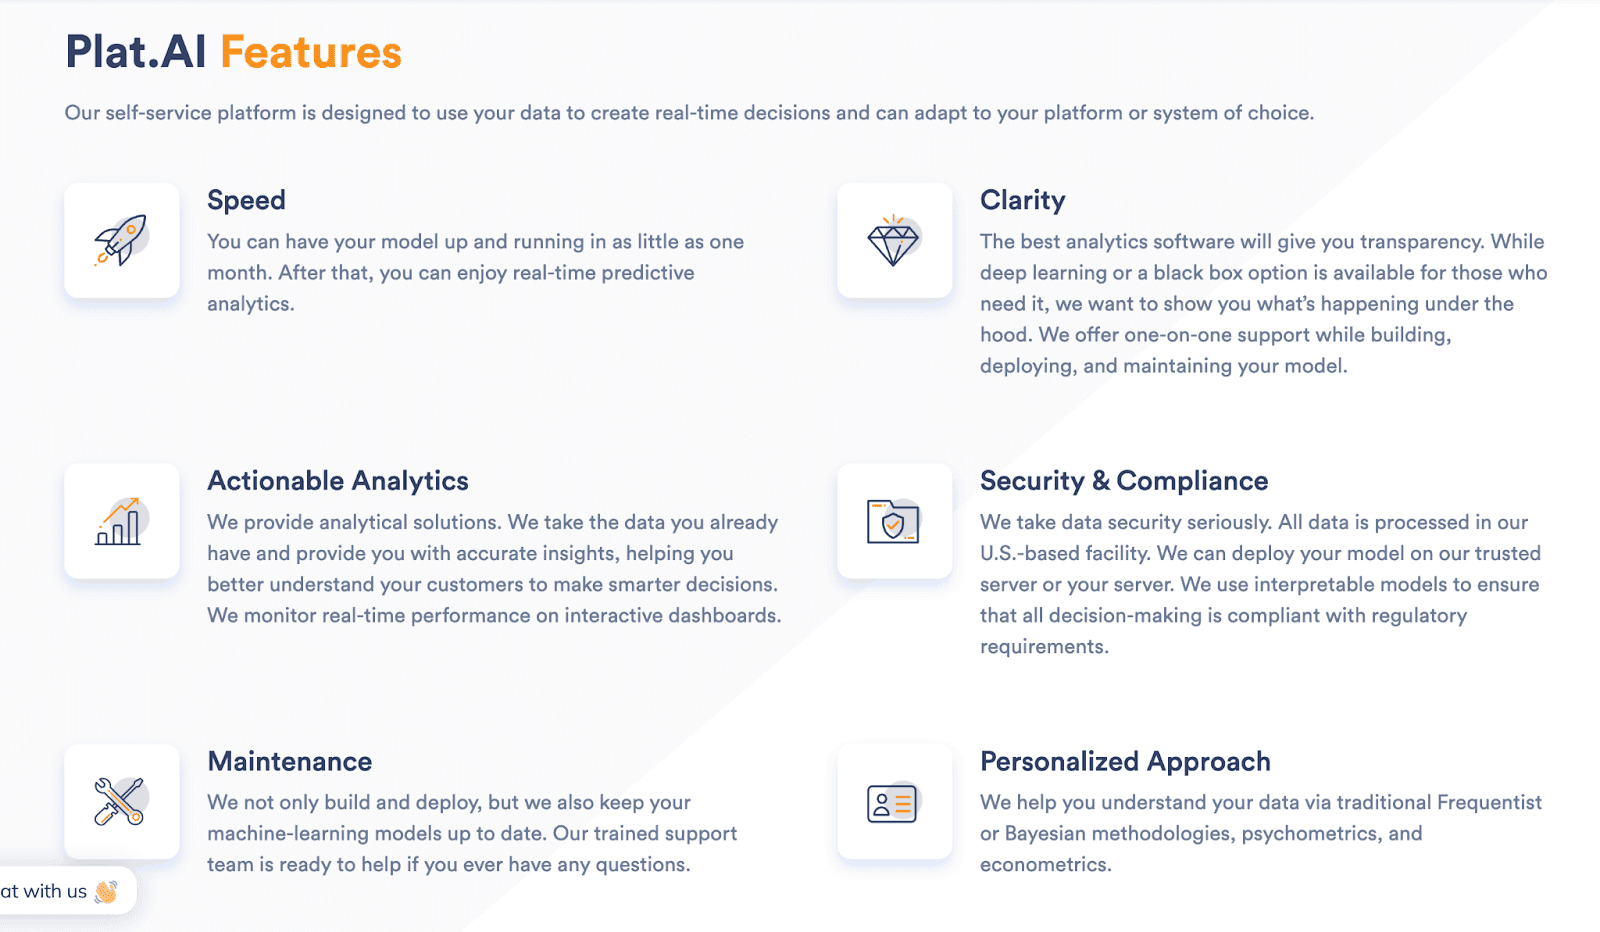 Plan.AI features - Speed, Clarity, Actionable Analytics, Security & Compliance, Maintenance, Personalized Approach